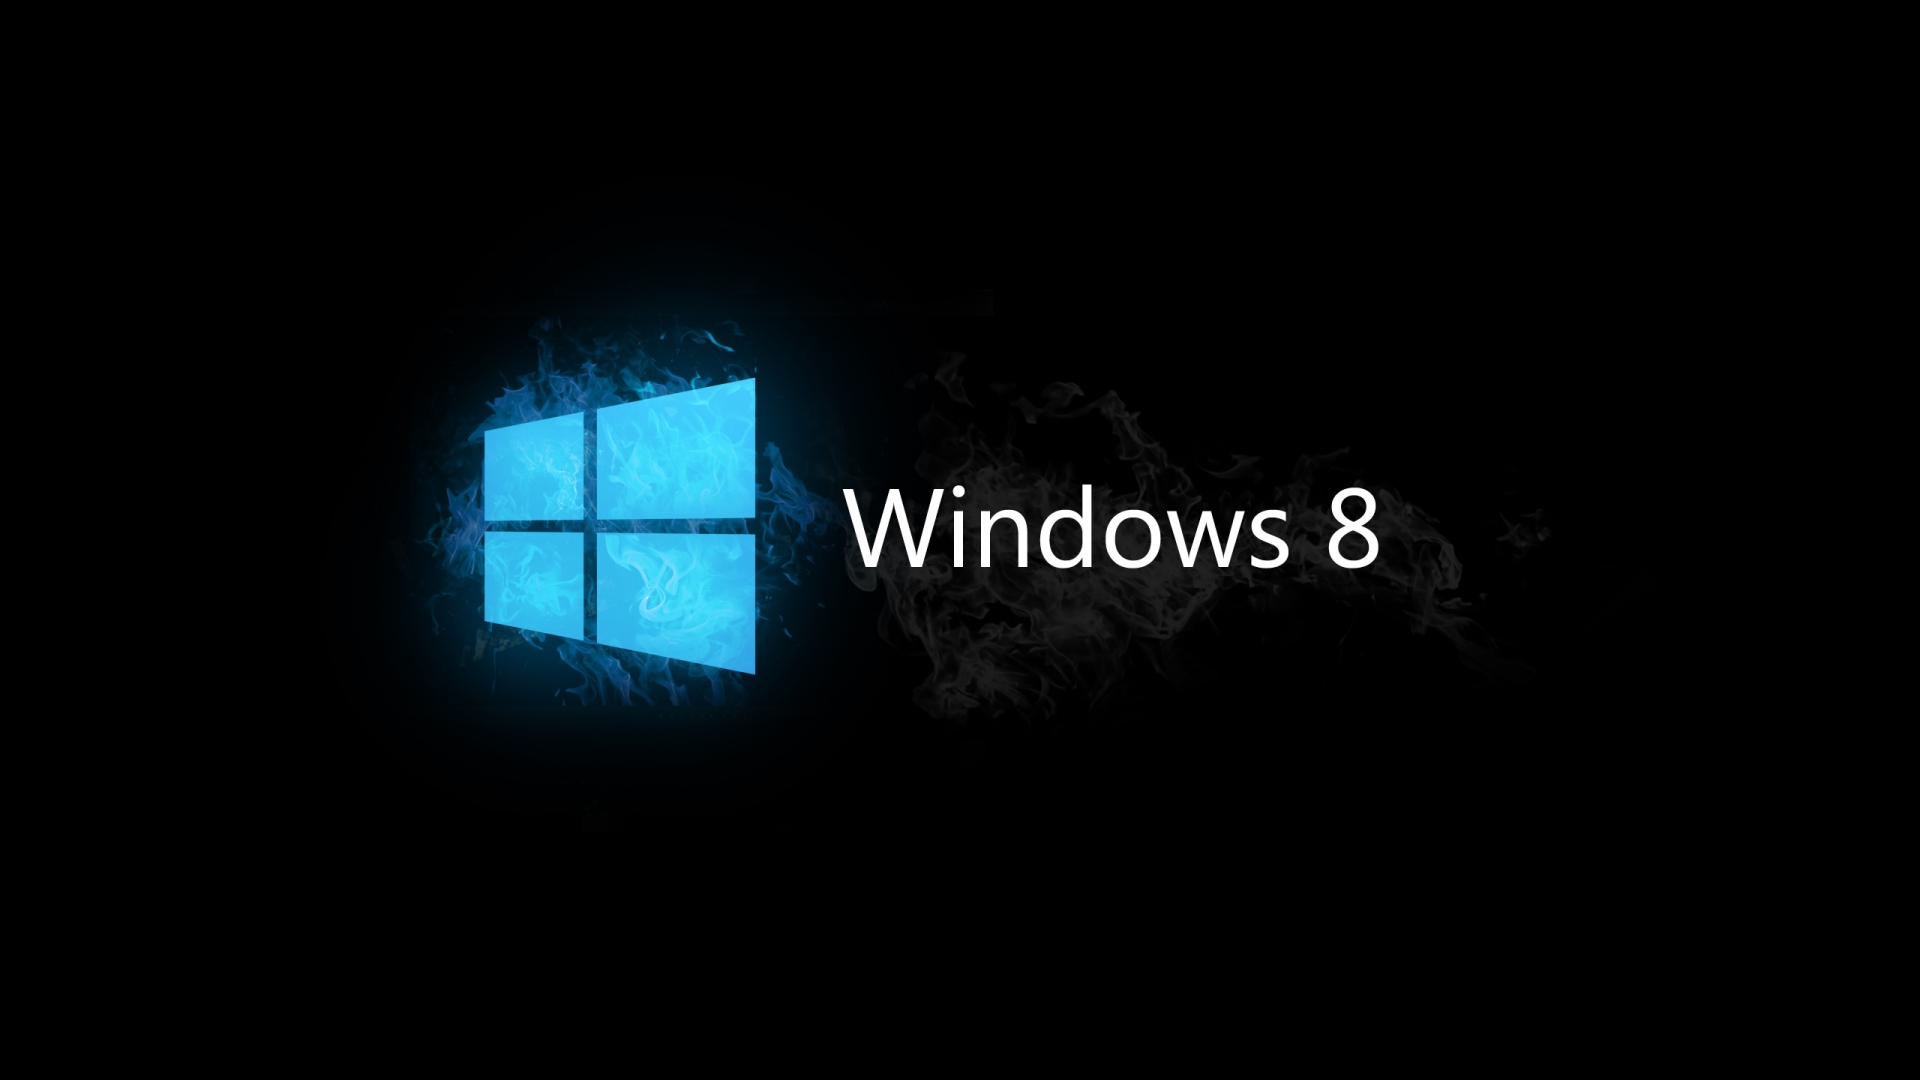 Windows 8 Blue and Black for 1920 x 1080 HDTV 1080p resolution